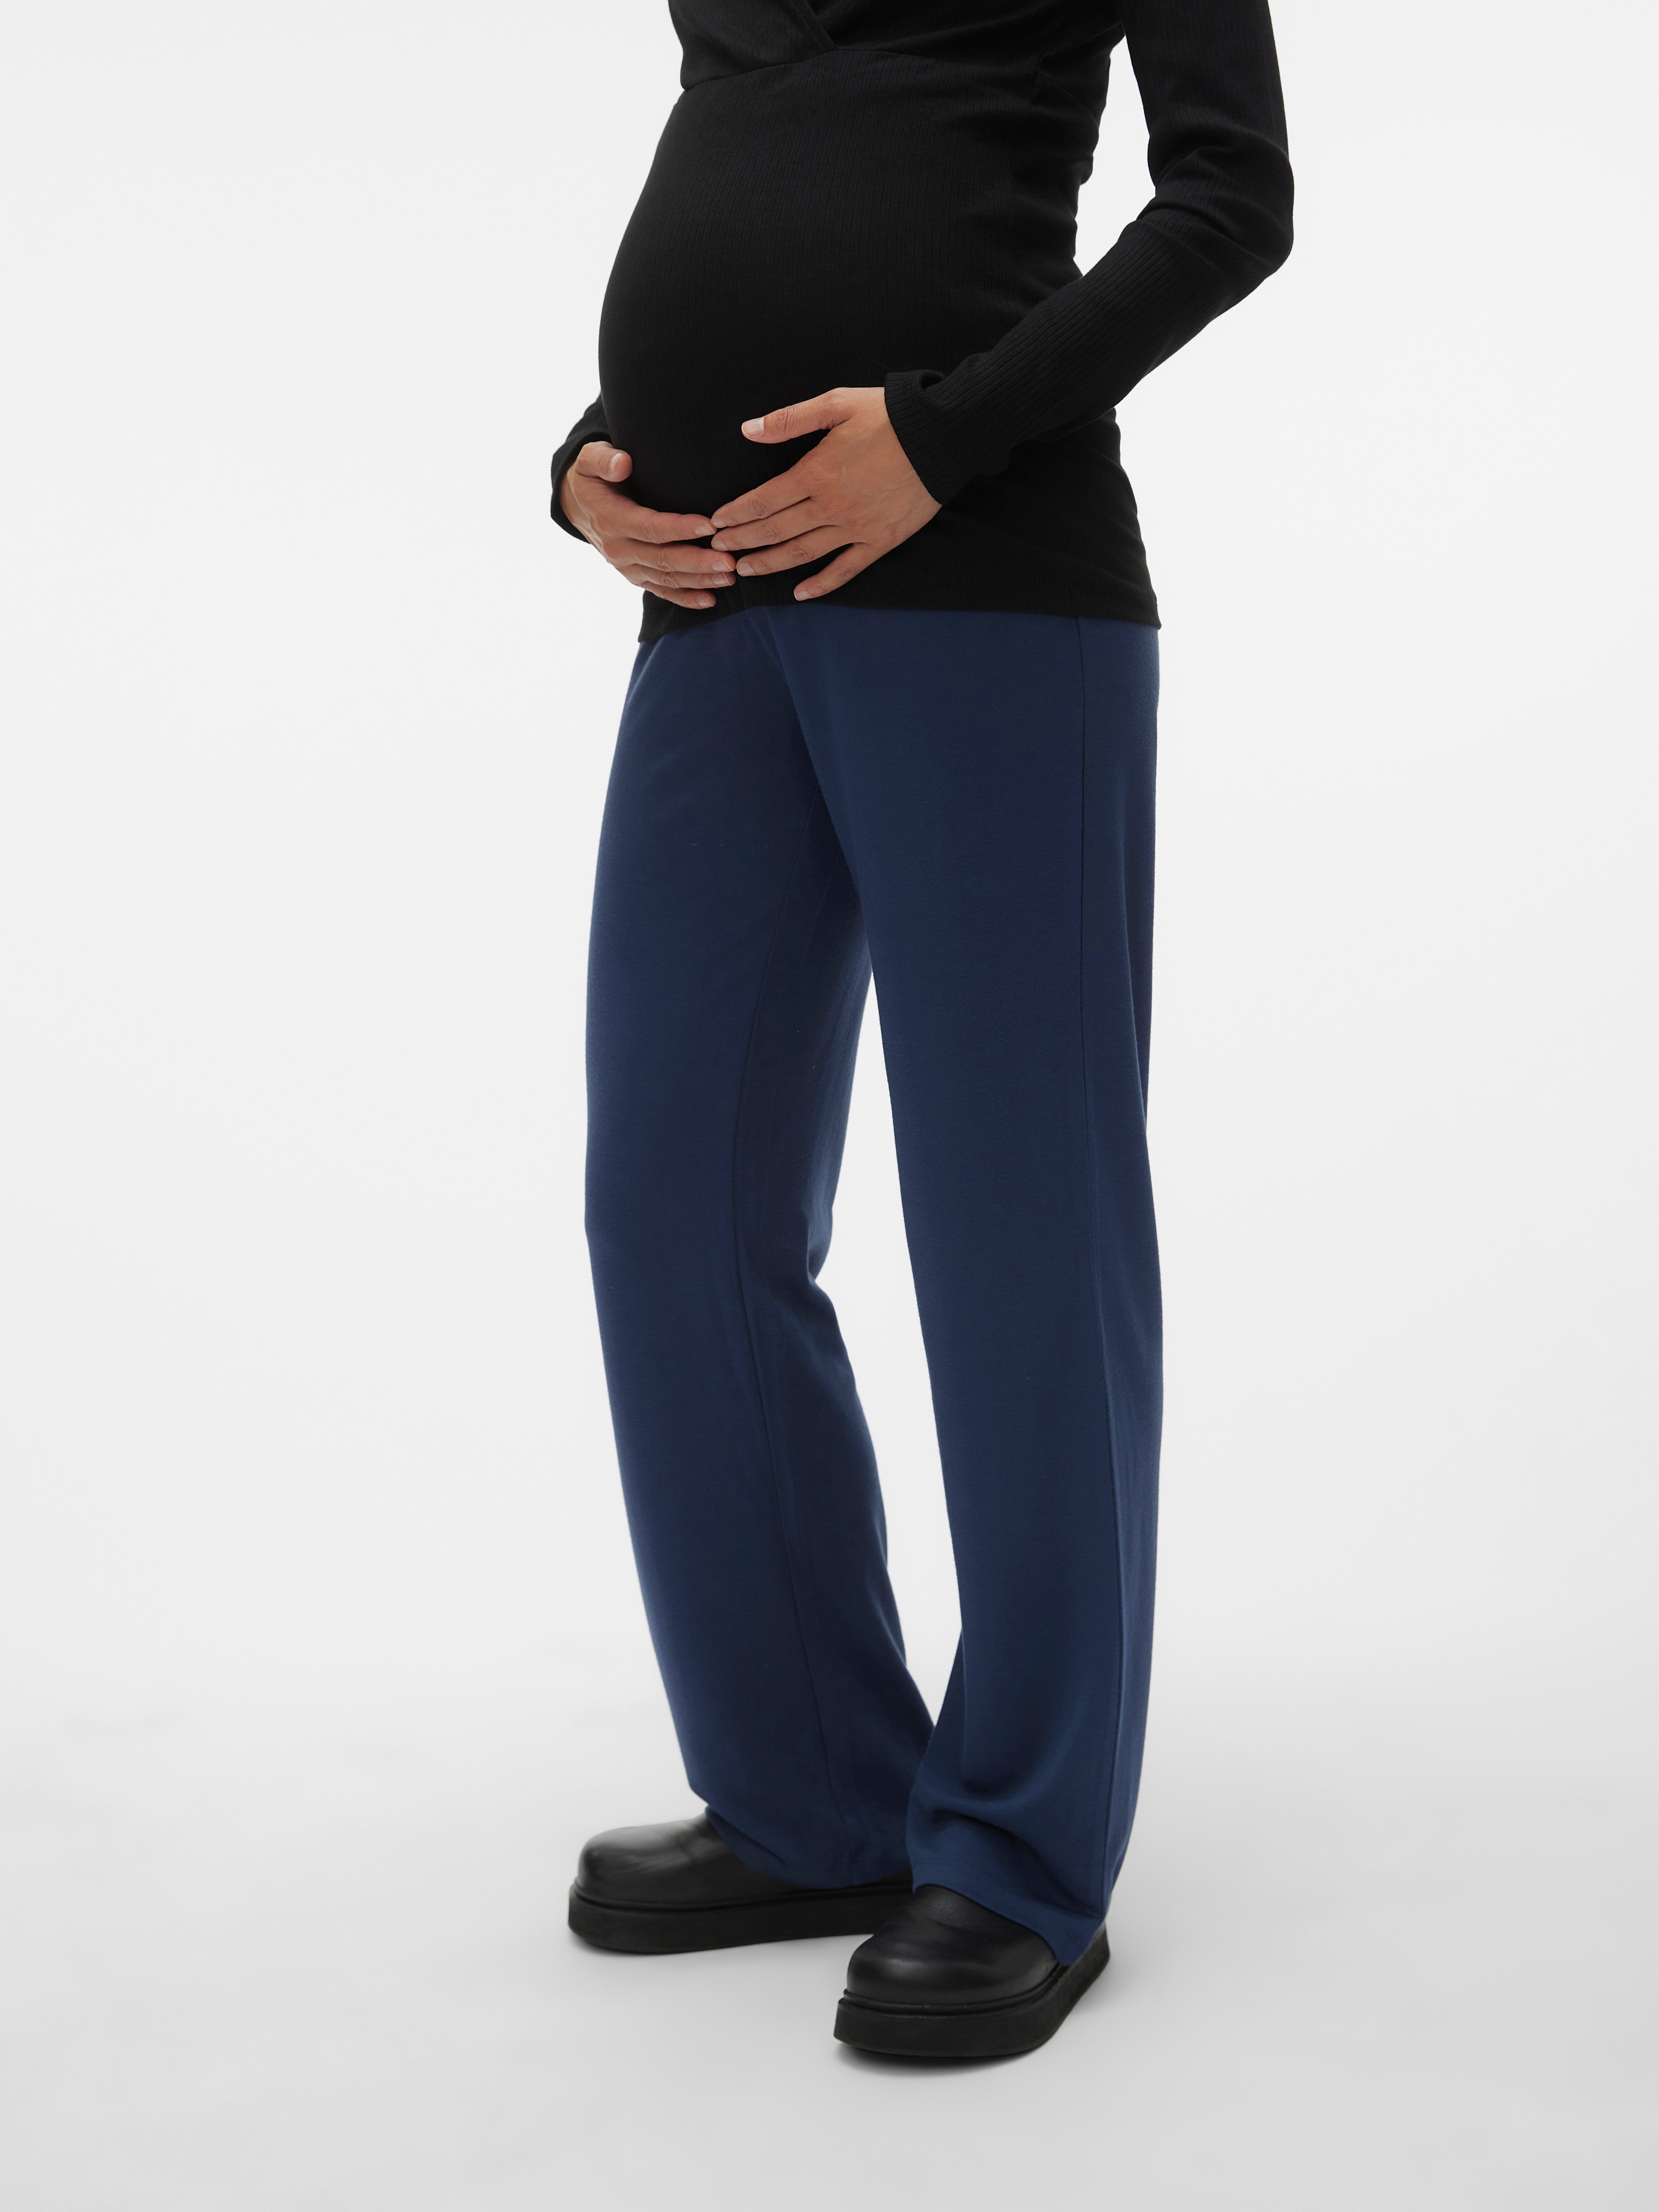 Healing Hands HH Works 9510 Maternity Pant – Valley West Uniforms